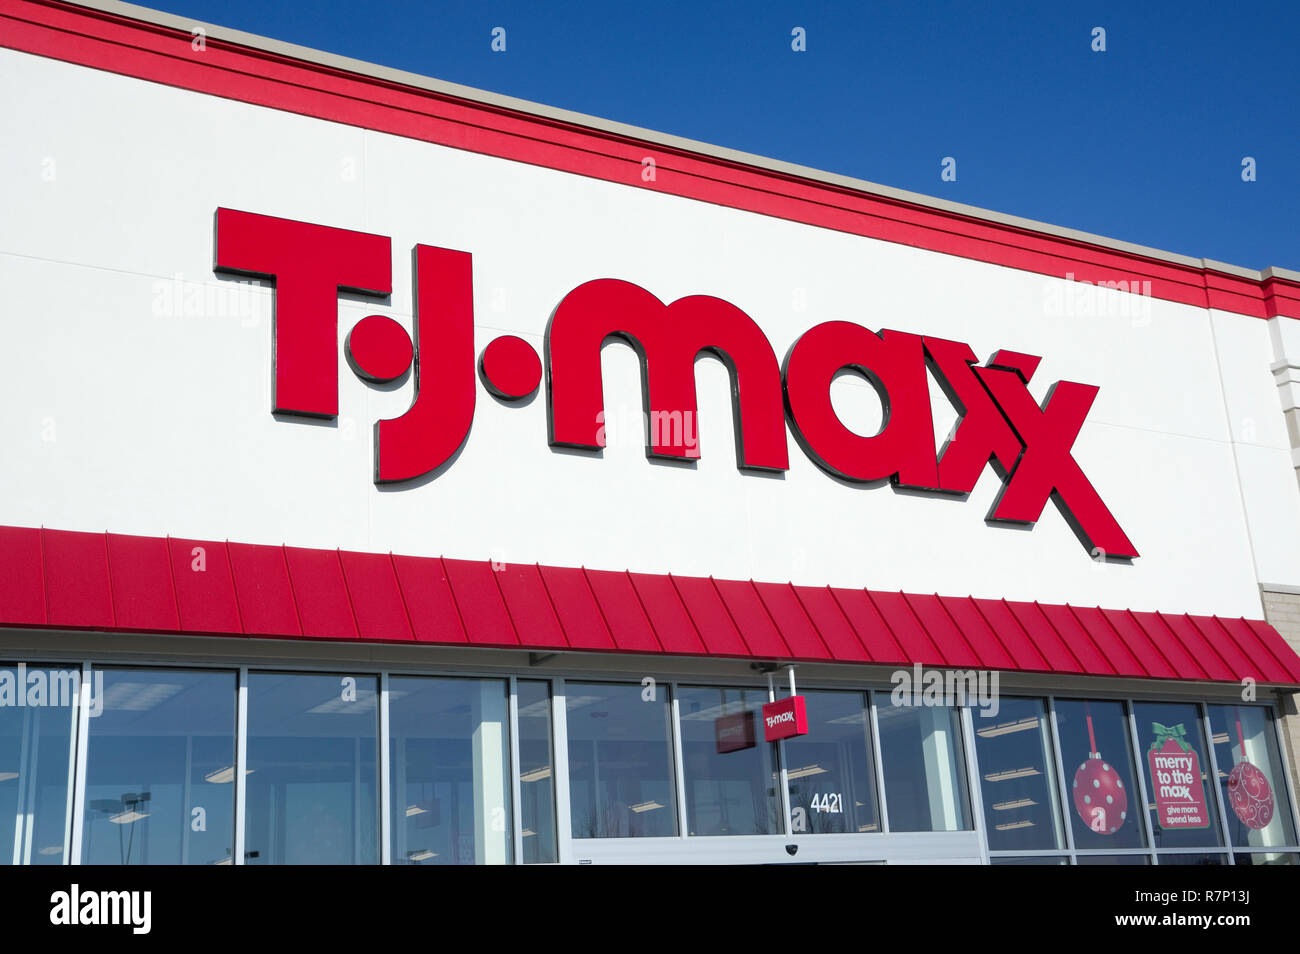 T J Maxx logo sign on store front Stock Photo